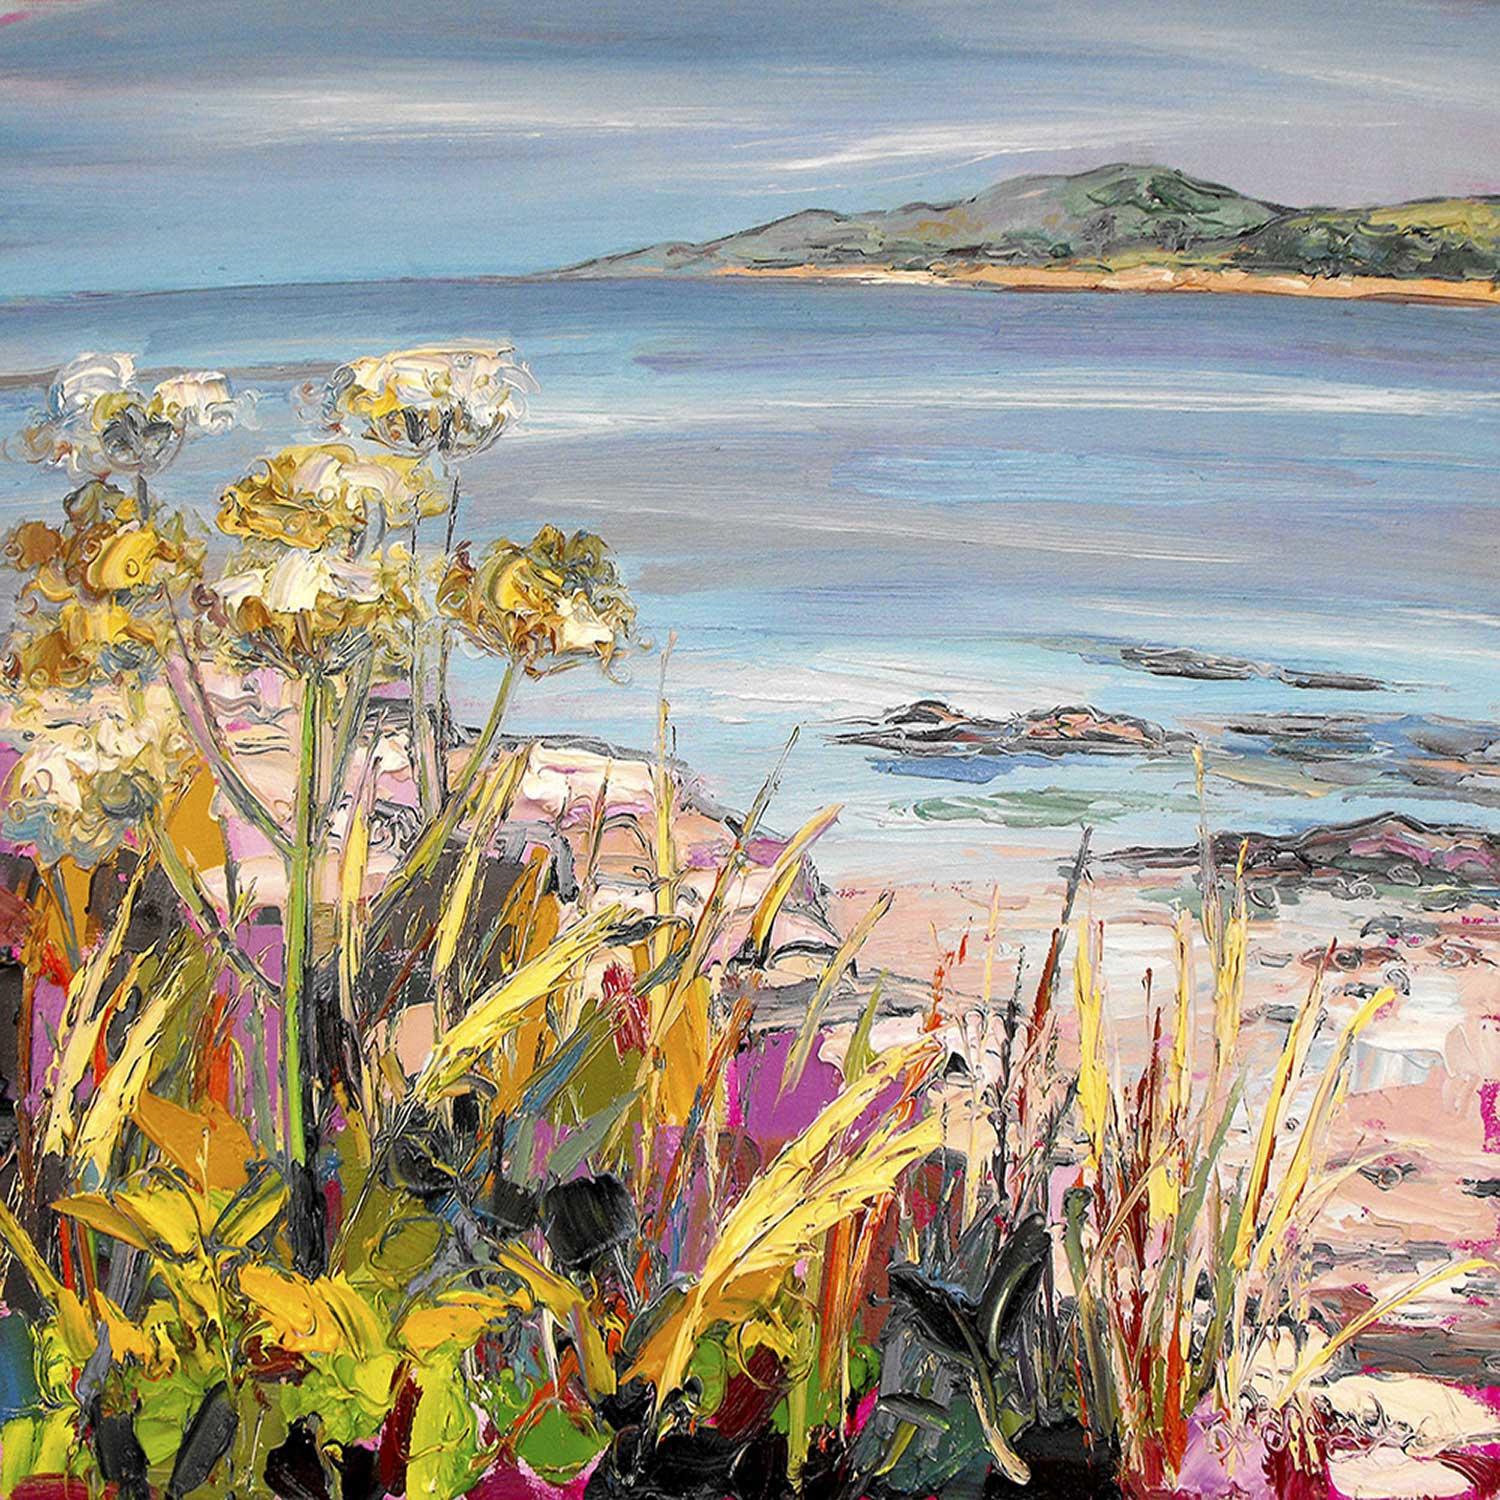 Afternoon Sun at the White Sands, Morar by Judith I Bridgland